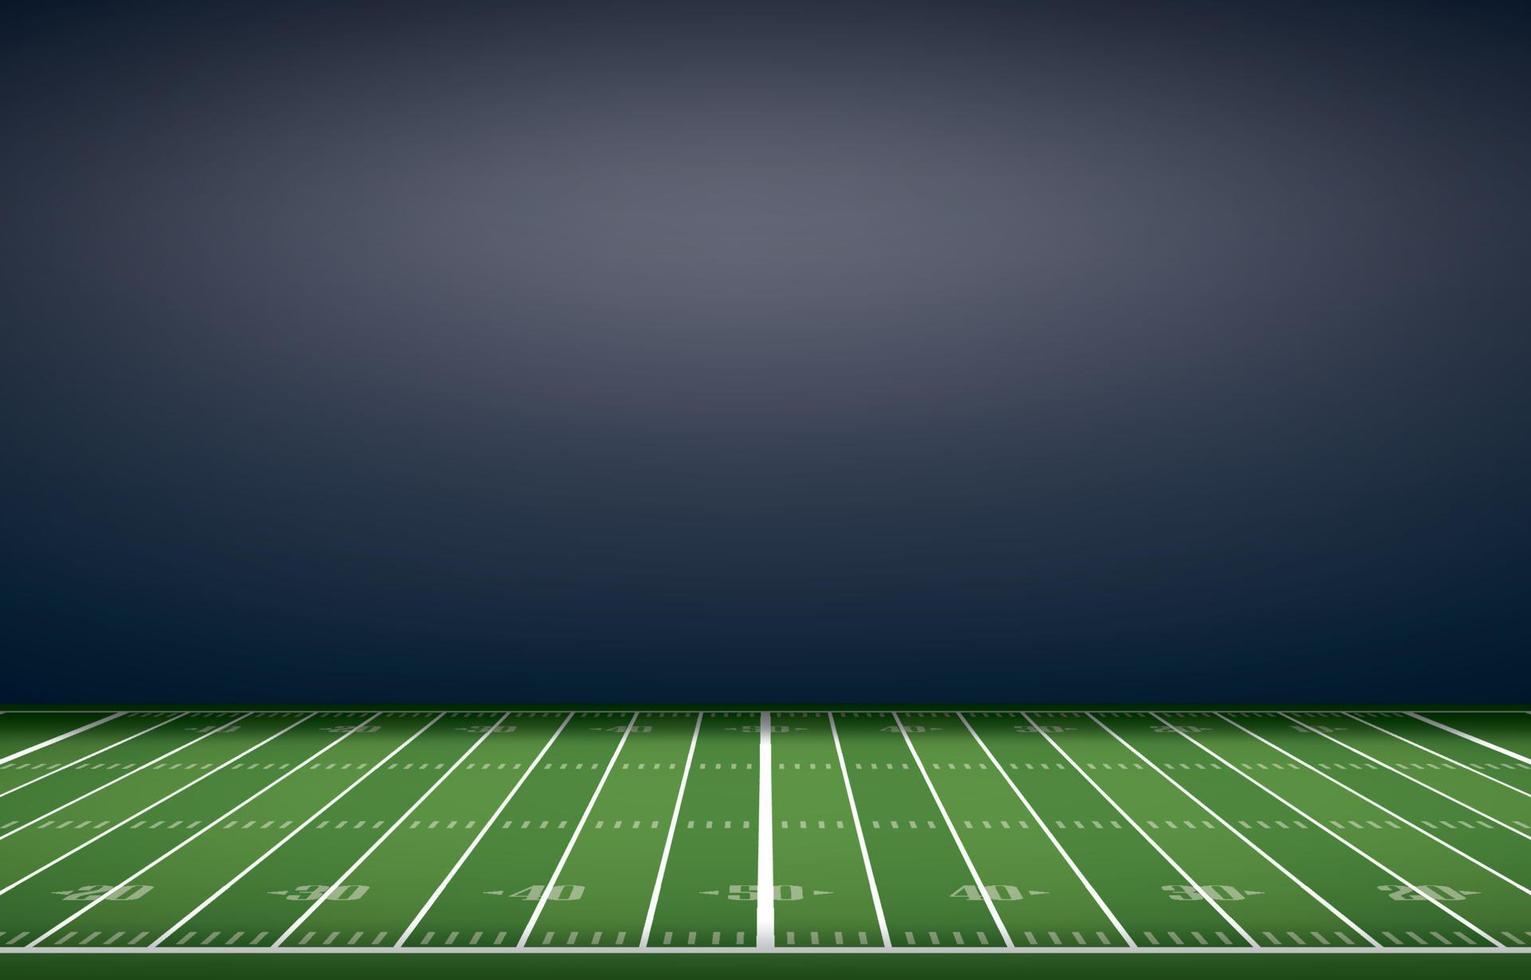 American football stadium background with perspective line pattern of grass field. Vector. vector